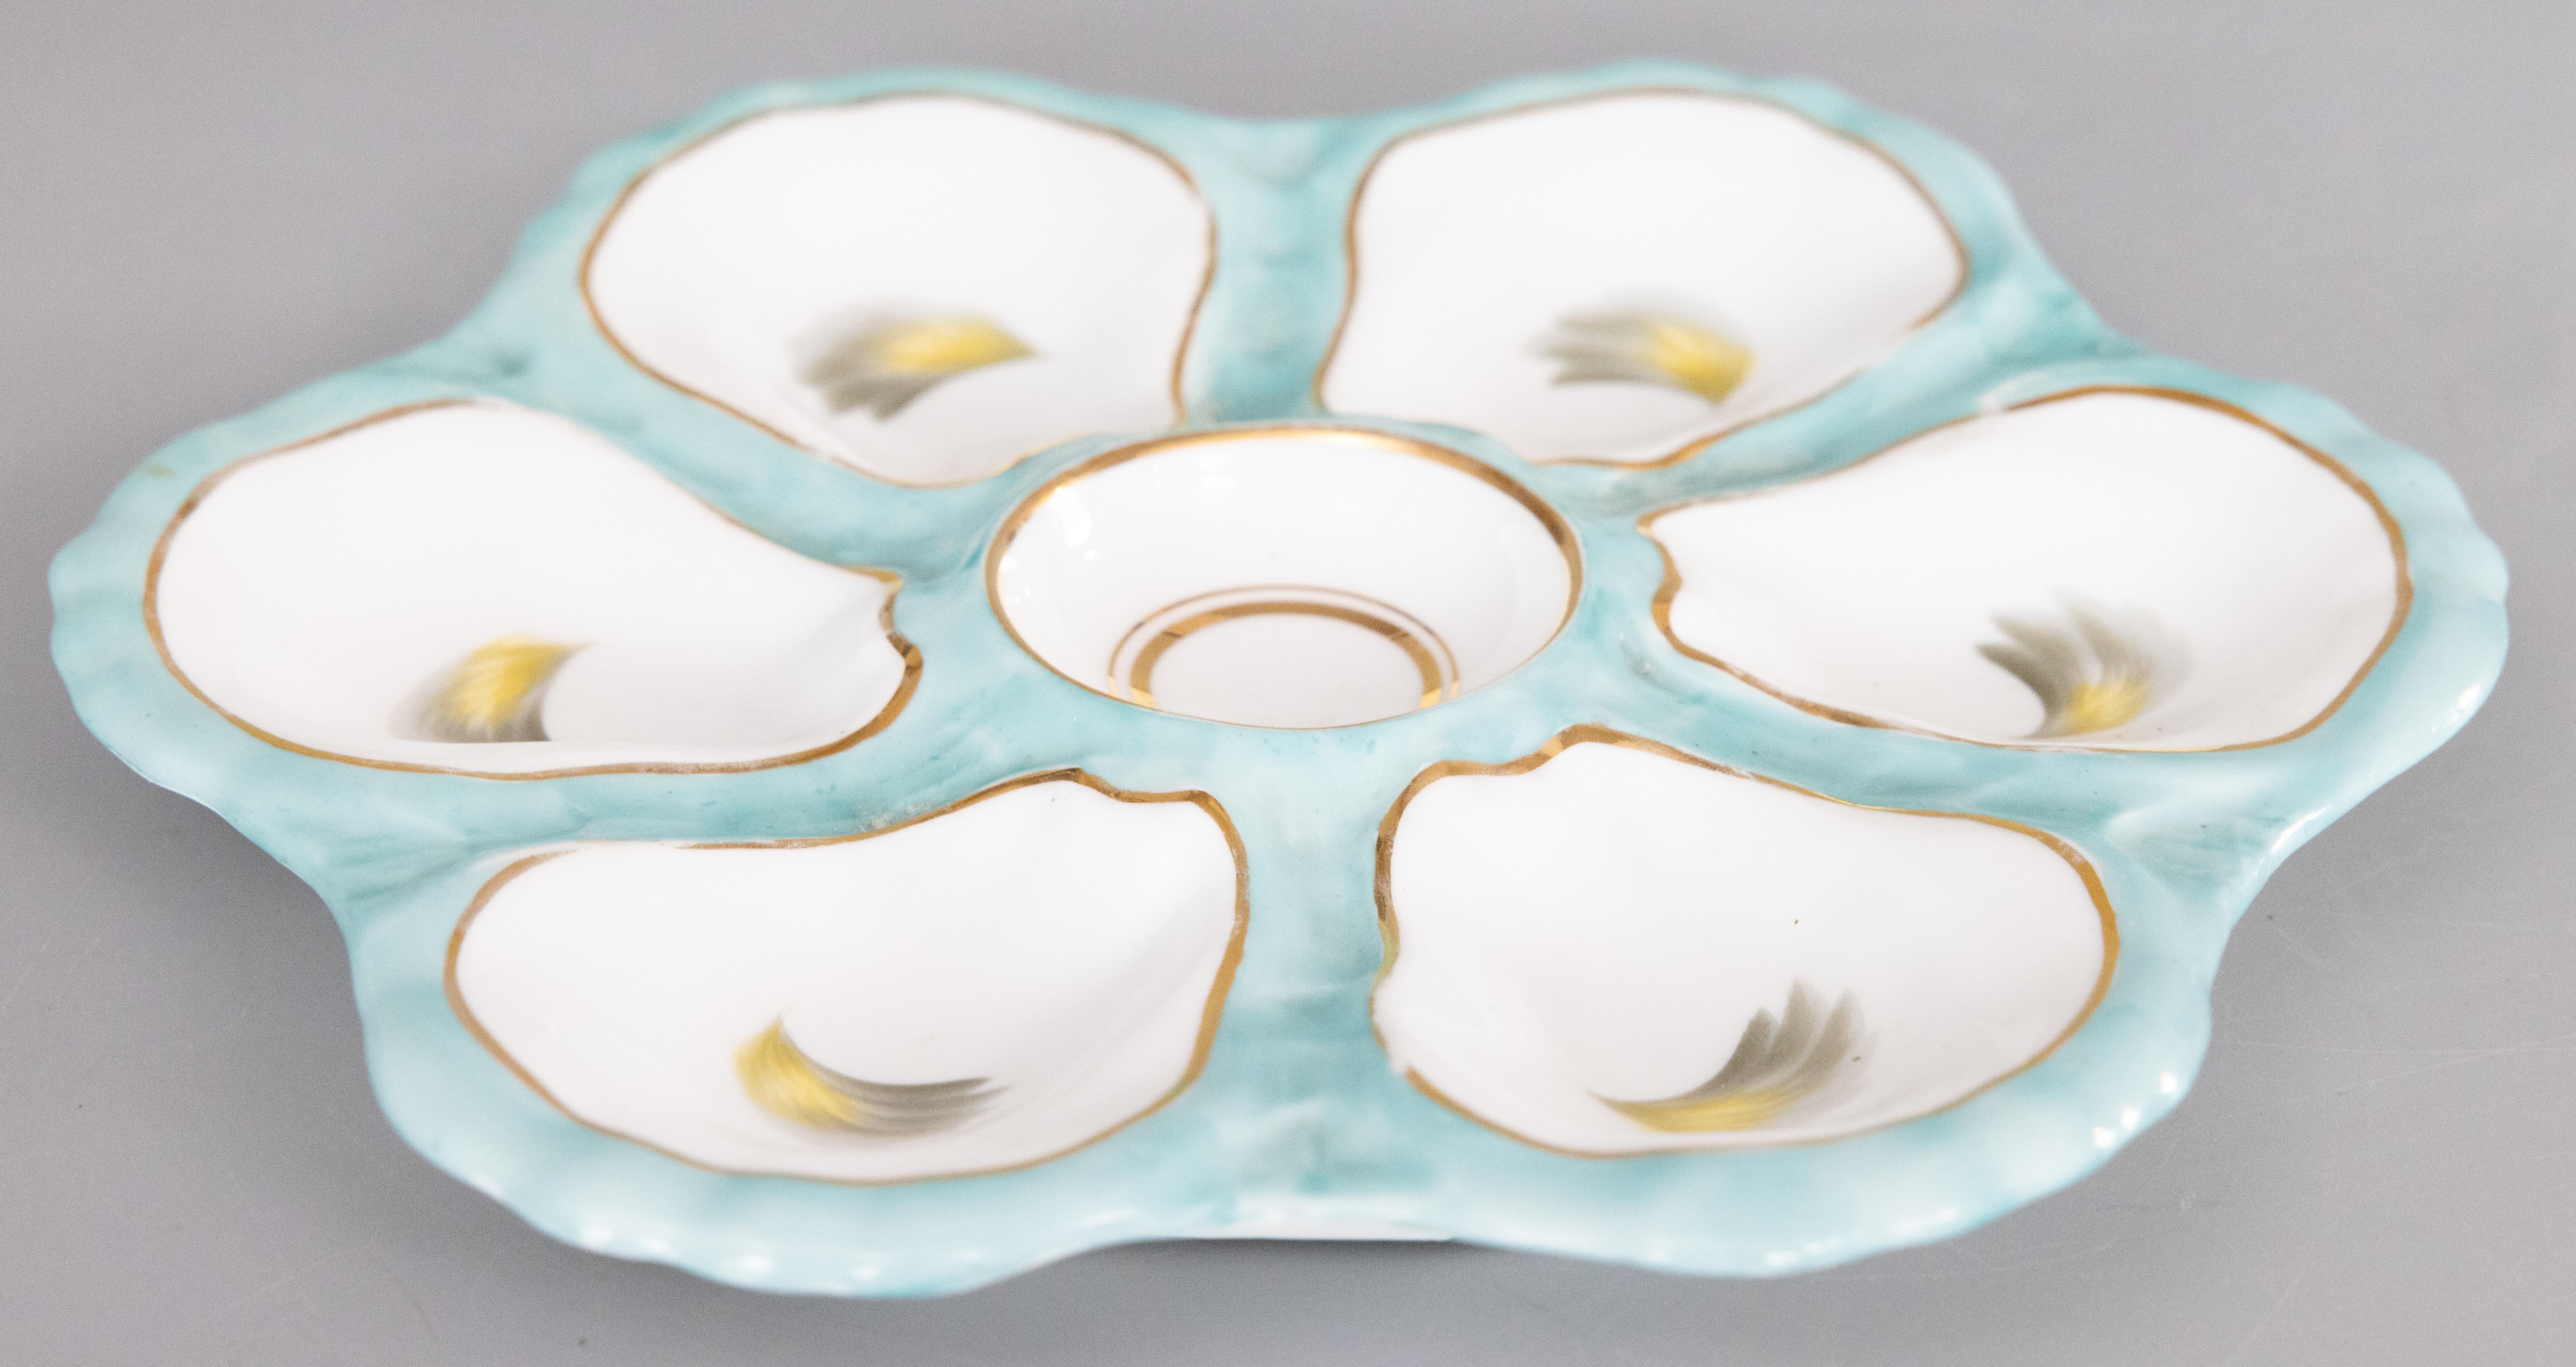 A gorgeous antique 19th-Century French porcelain oyster plate. Hand painted and numbered on reverse. Attributed to Limoges, France, circa 1880. This fine quality oyster plate has six wells, lovely turquoise accents, and gilt details. It displays